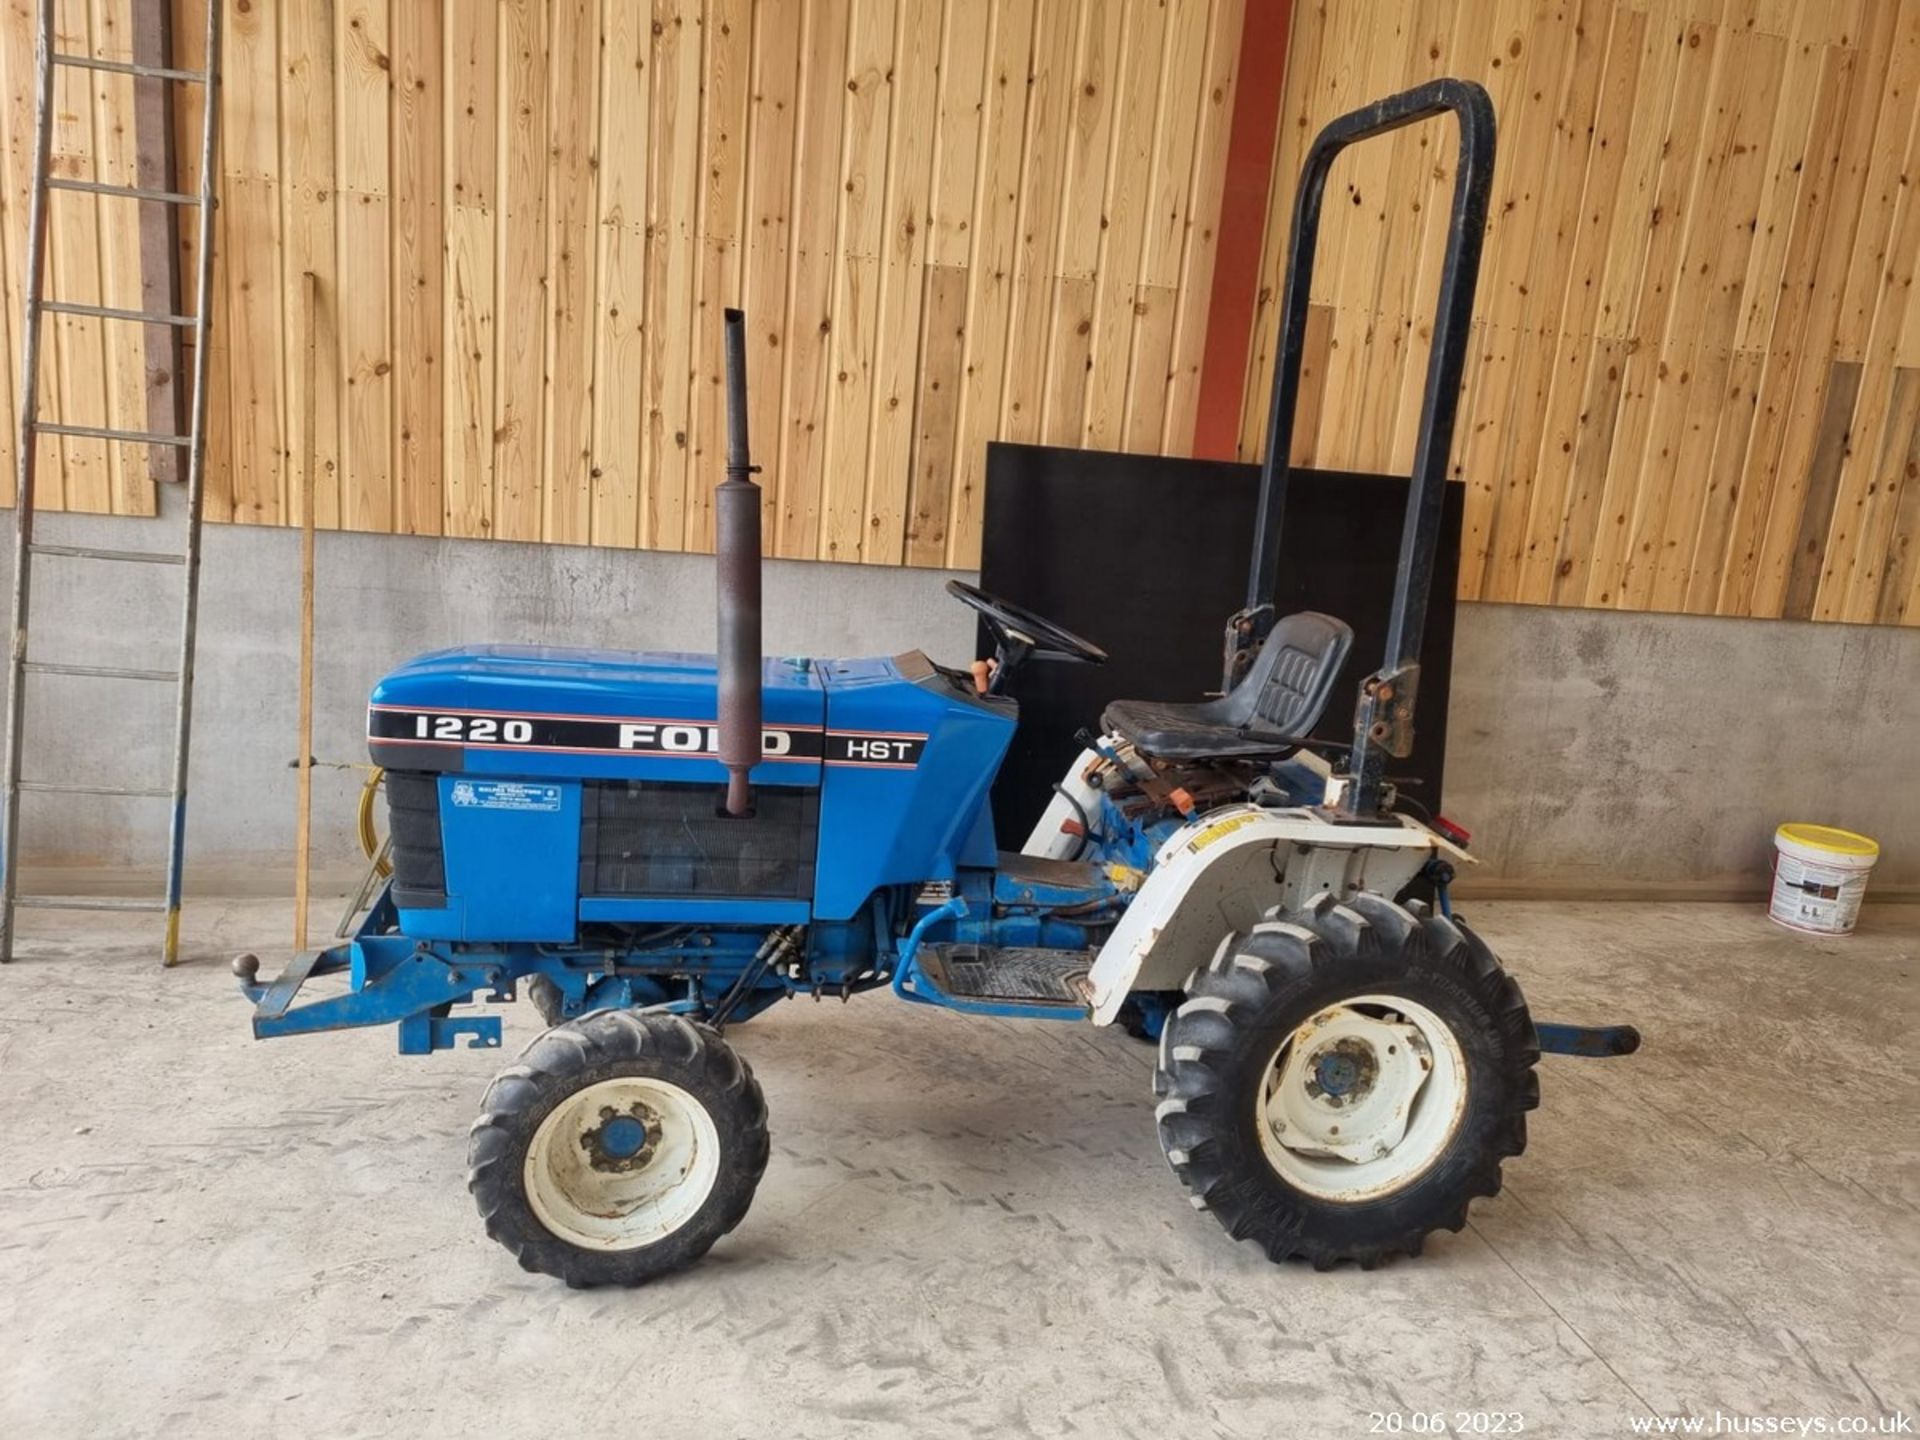 FORD 1220 HST COMPACT TRACTOR SHOWING 1844HRS